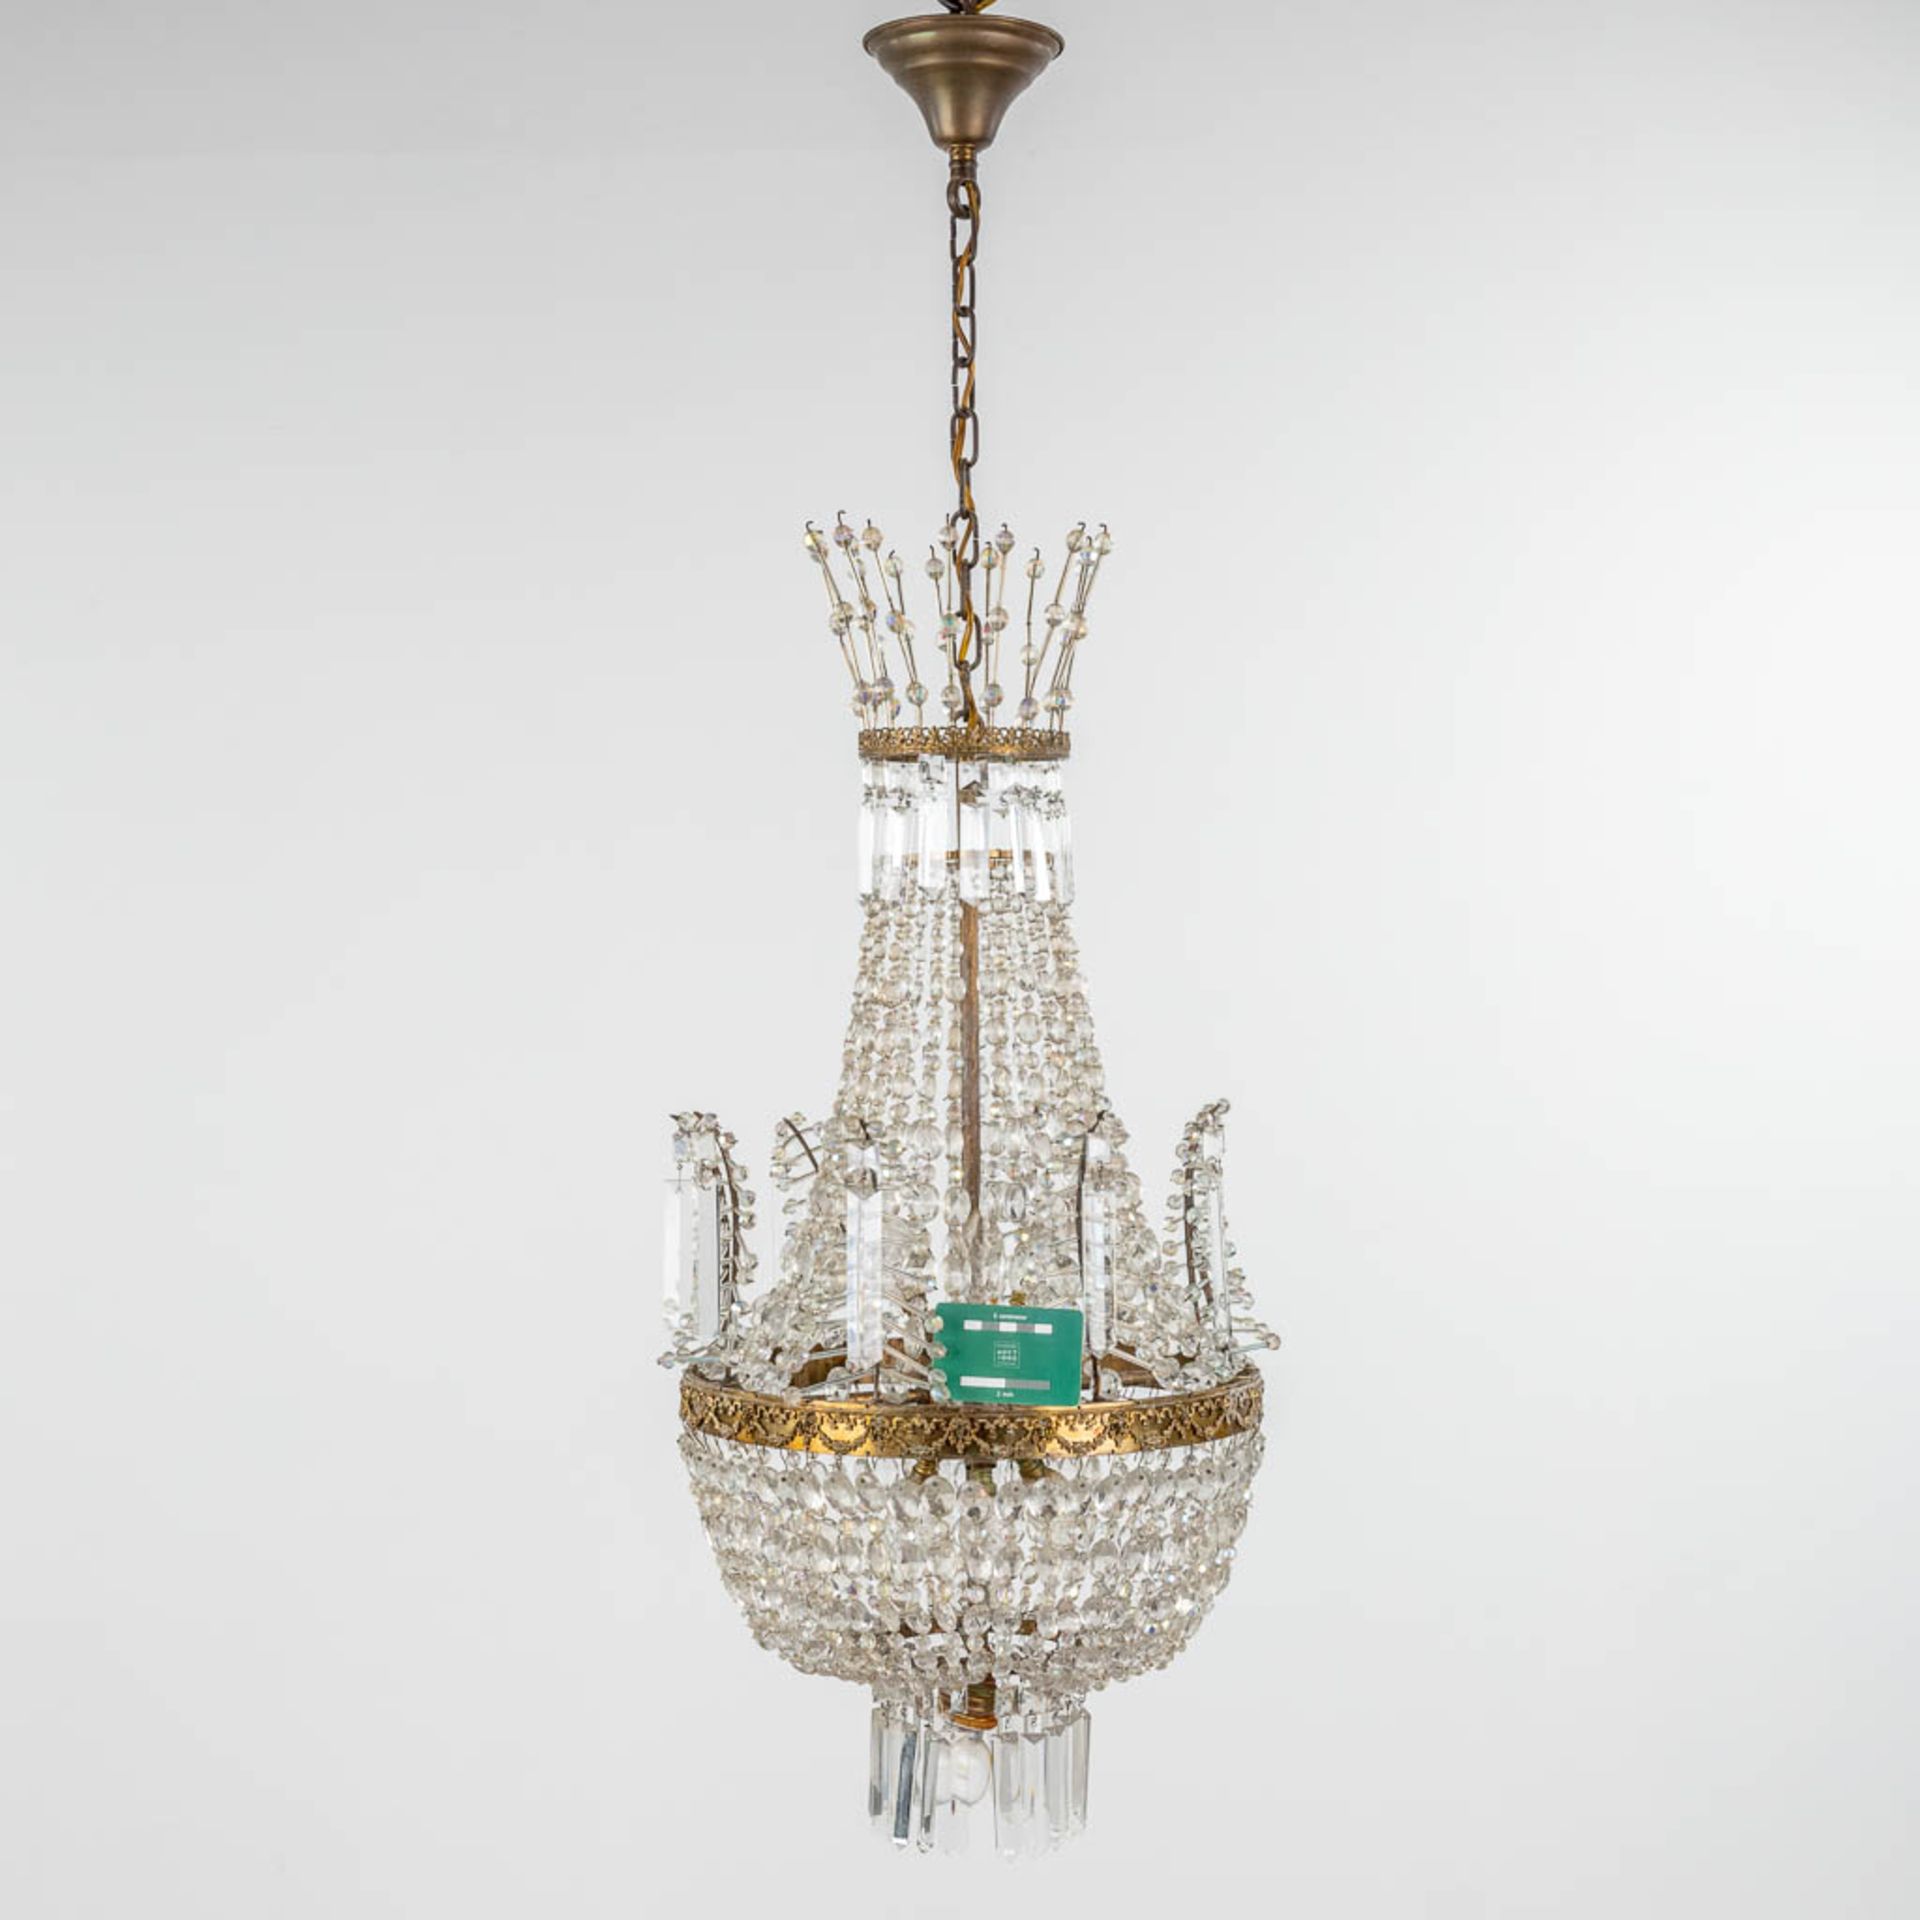 A chandelier 'Sac A Perles' decorated with tiny ram's heads. 20th century. (H: 83 x D: 42 cm) - Bild 2 aus 10